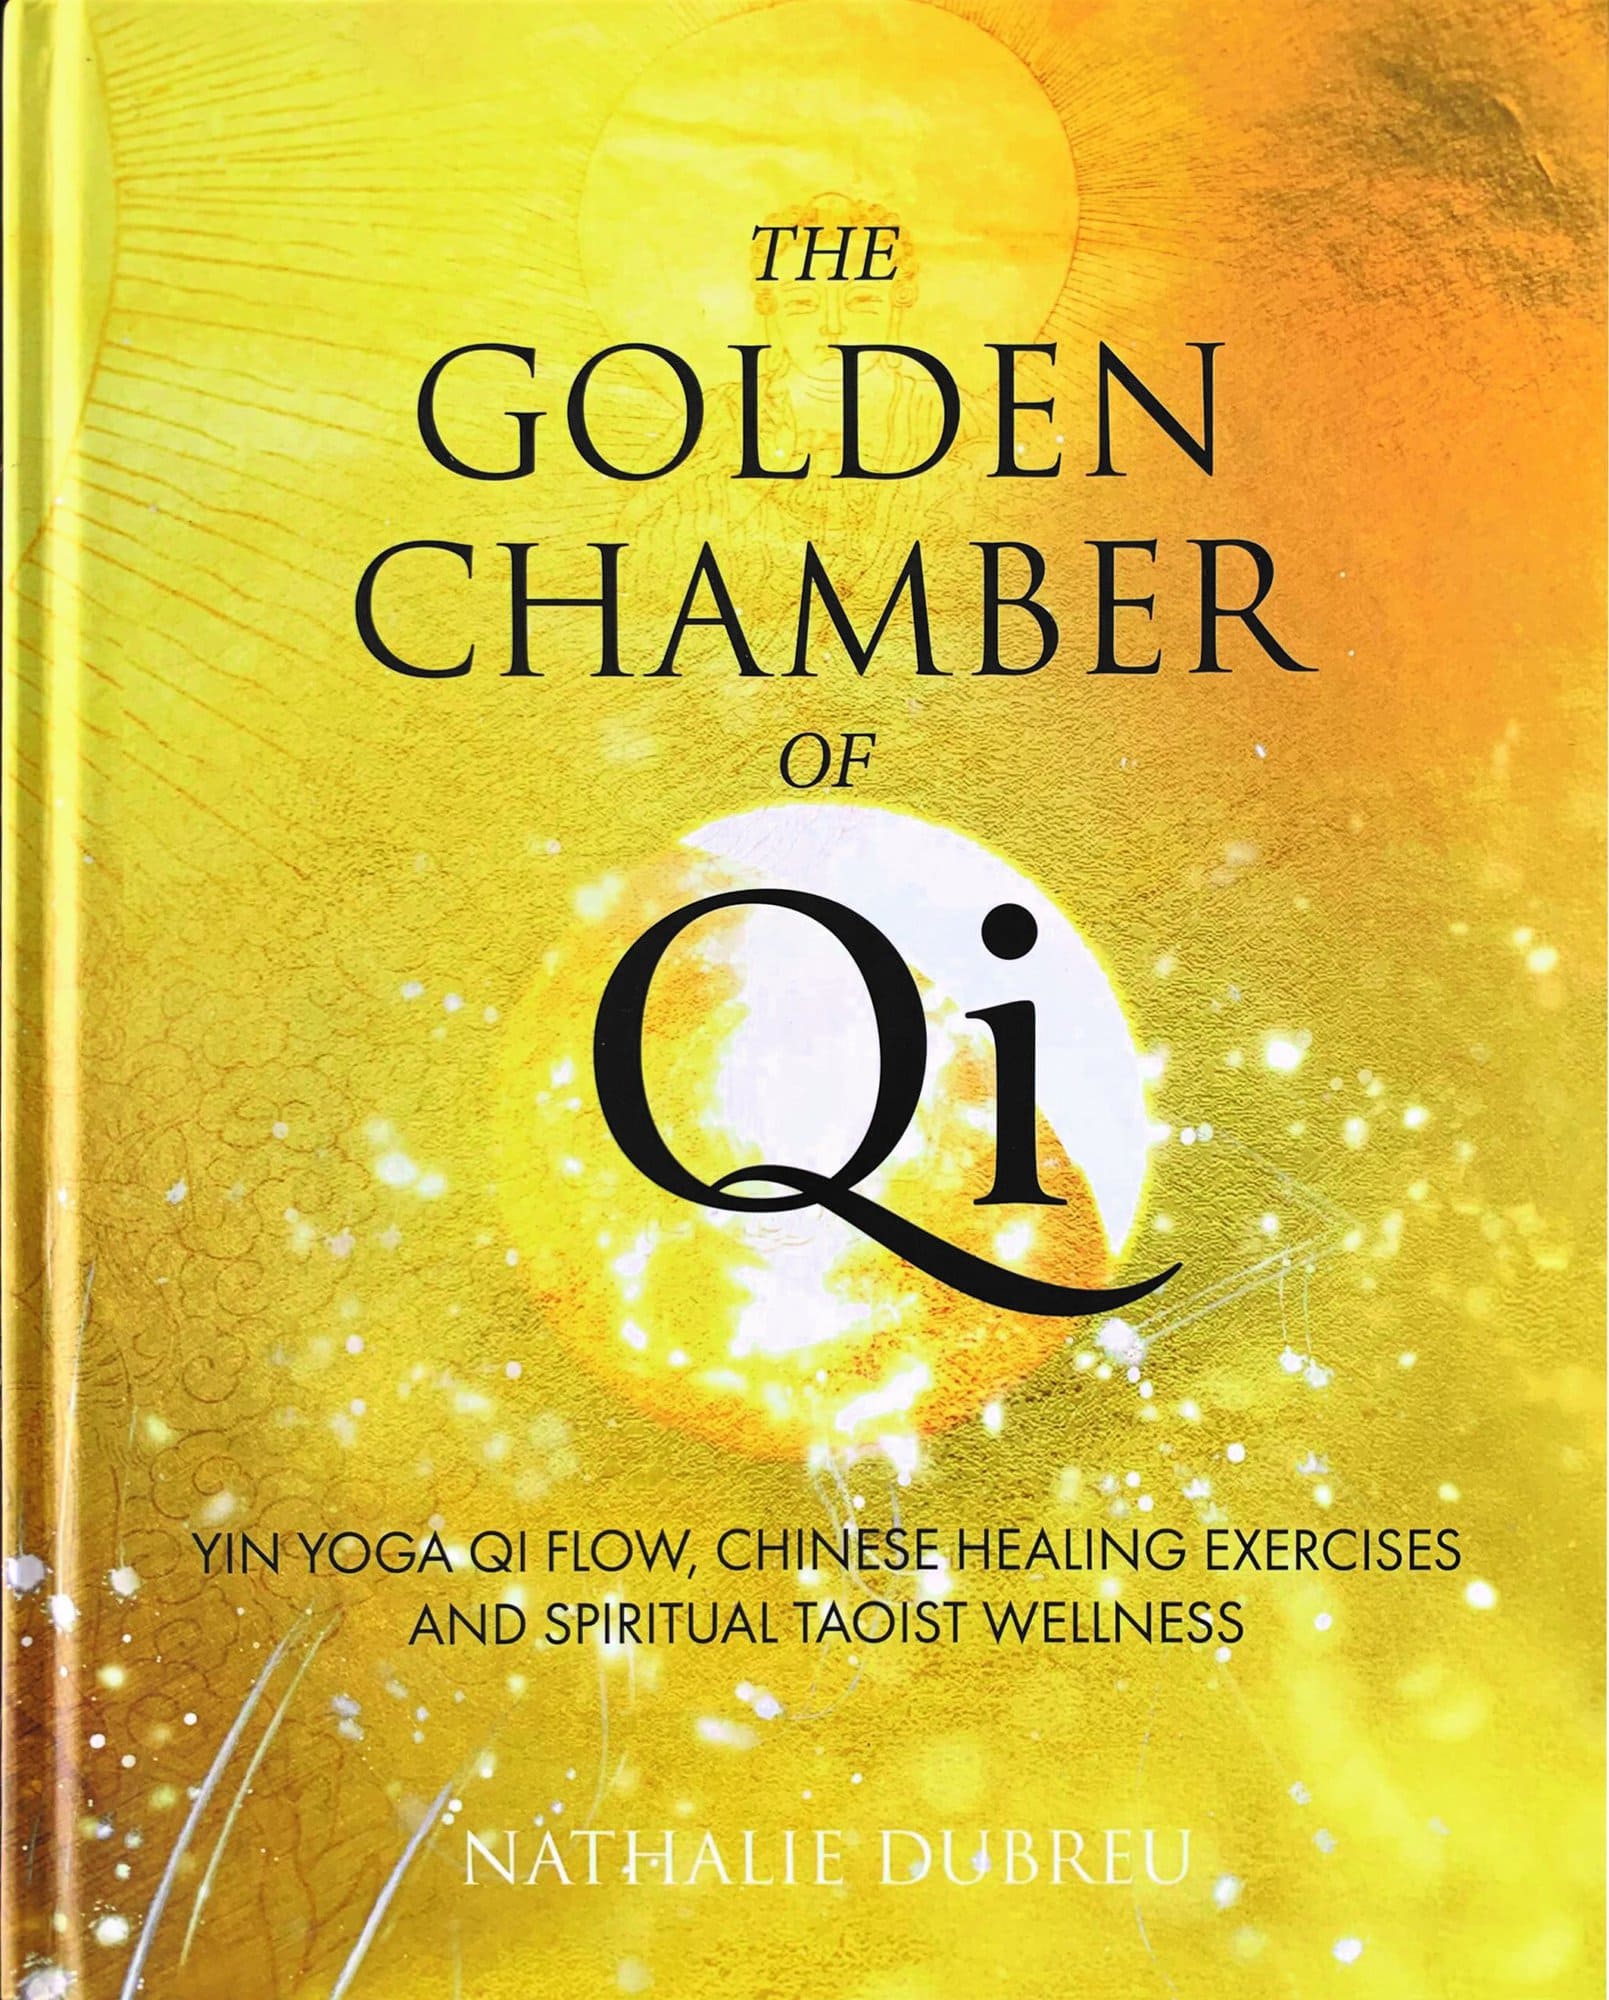 The Golden Chamber of Qi - Nathalie Dubreu Book Review